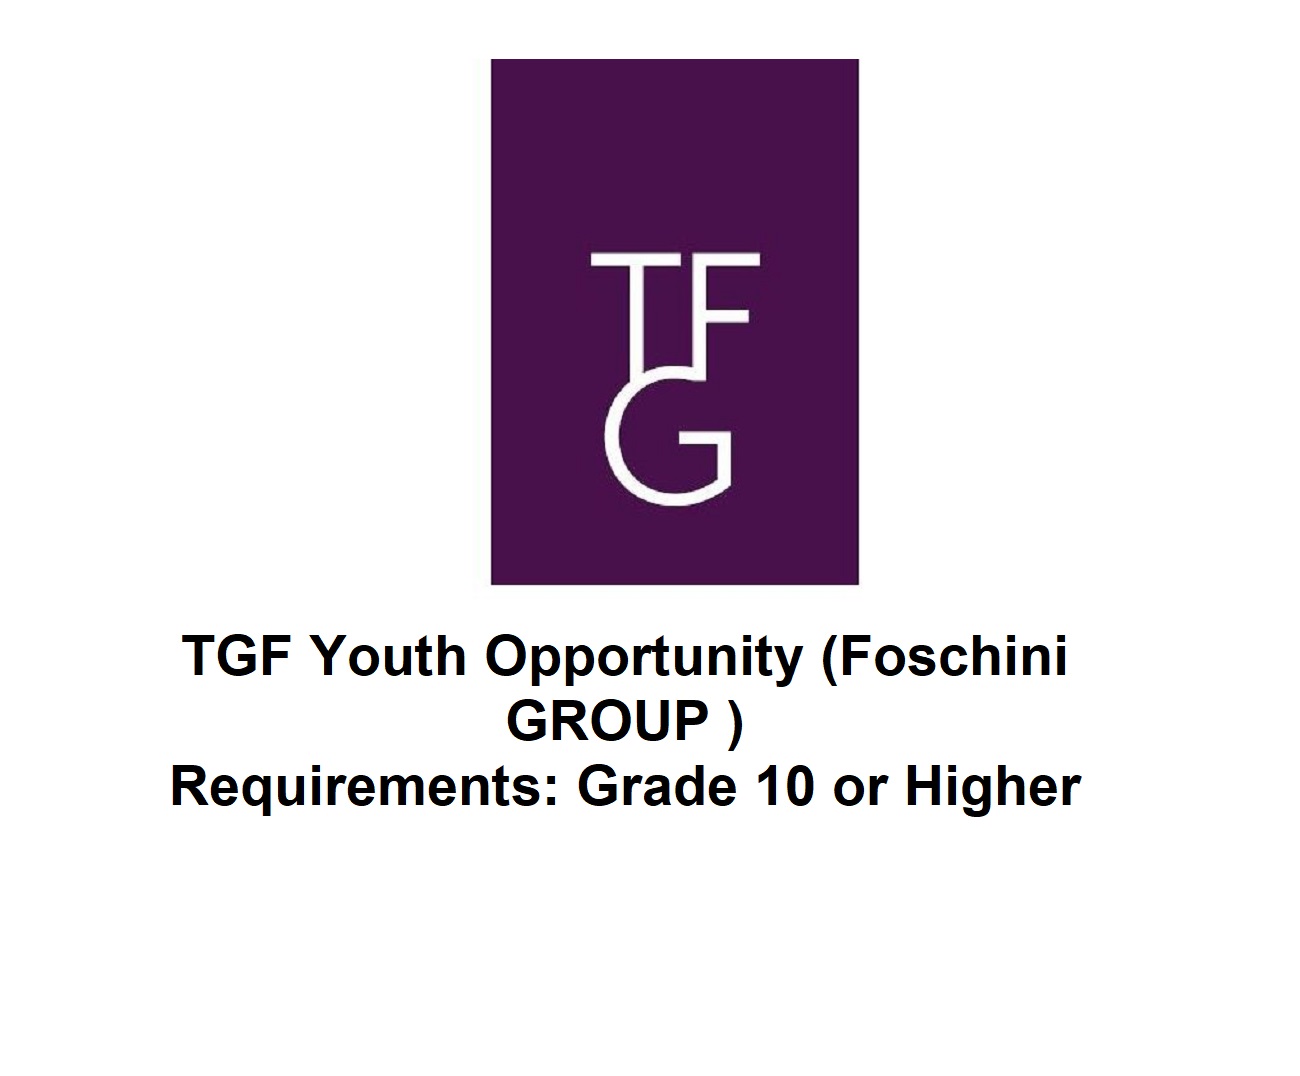 Foschini GROUP YES Youth Programme 2023 for Unemployed South Africans